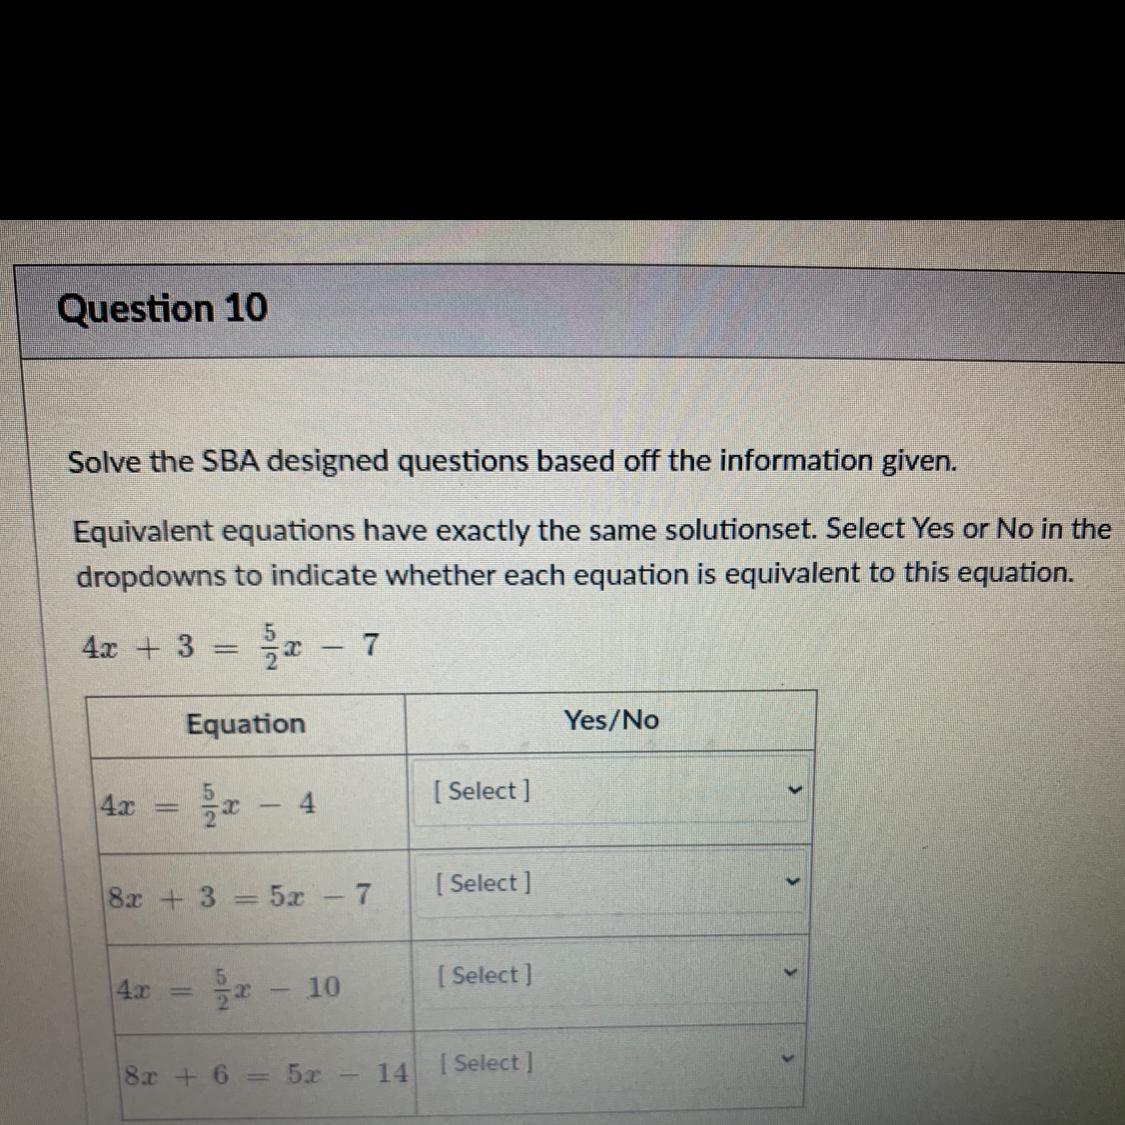 Equivalent Equations Have Exactly The Same Solution Set. Select Yes Or No In Thedropdowns To Indicate